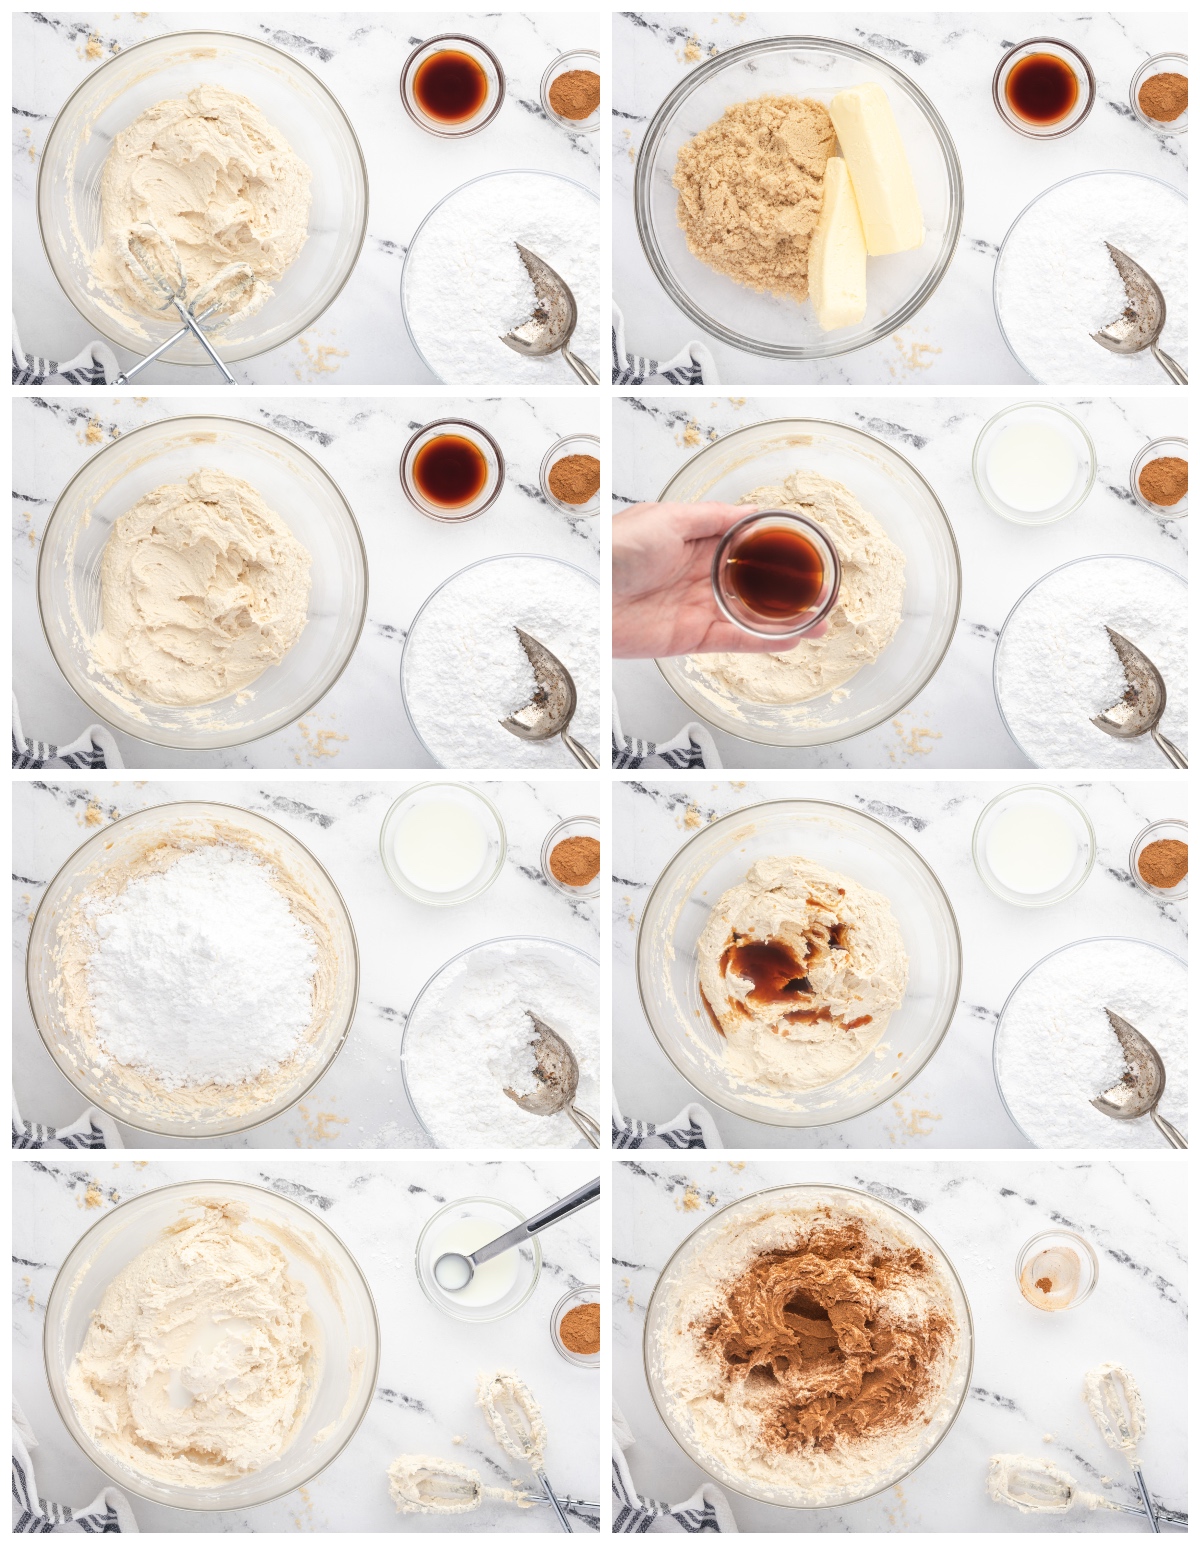 how to make brown sugar frosting step by step photo instructions